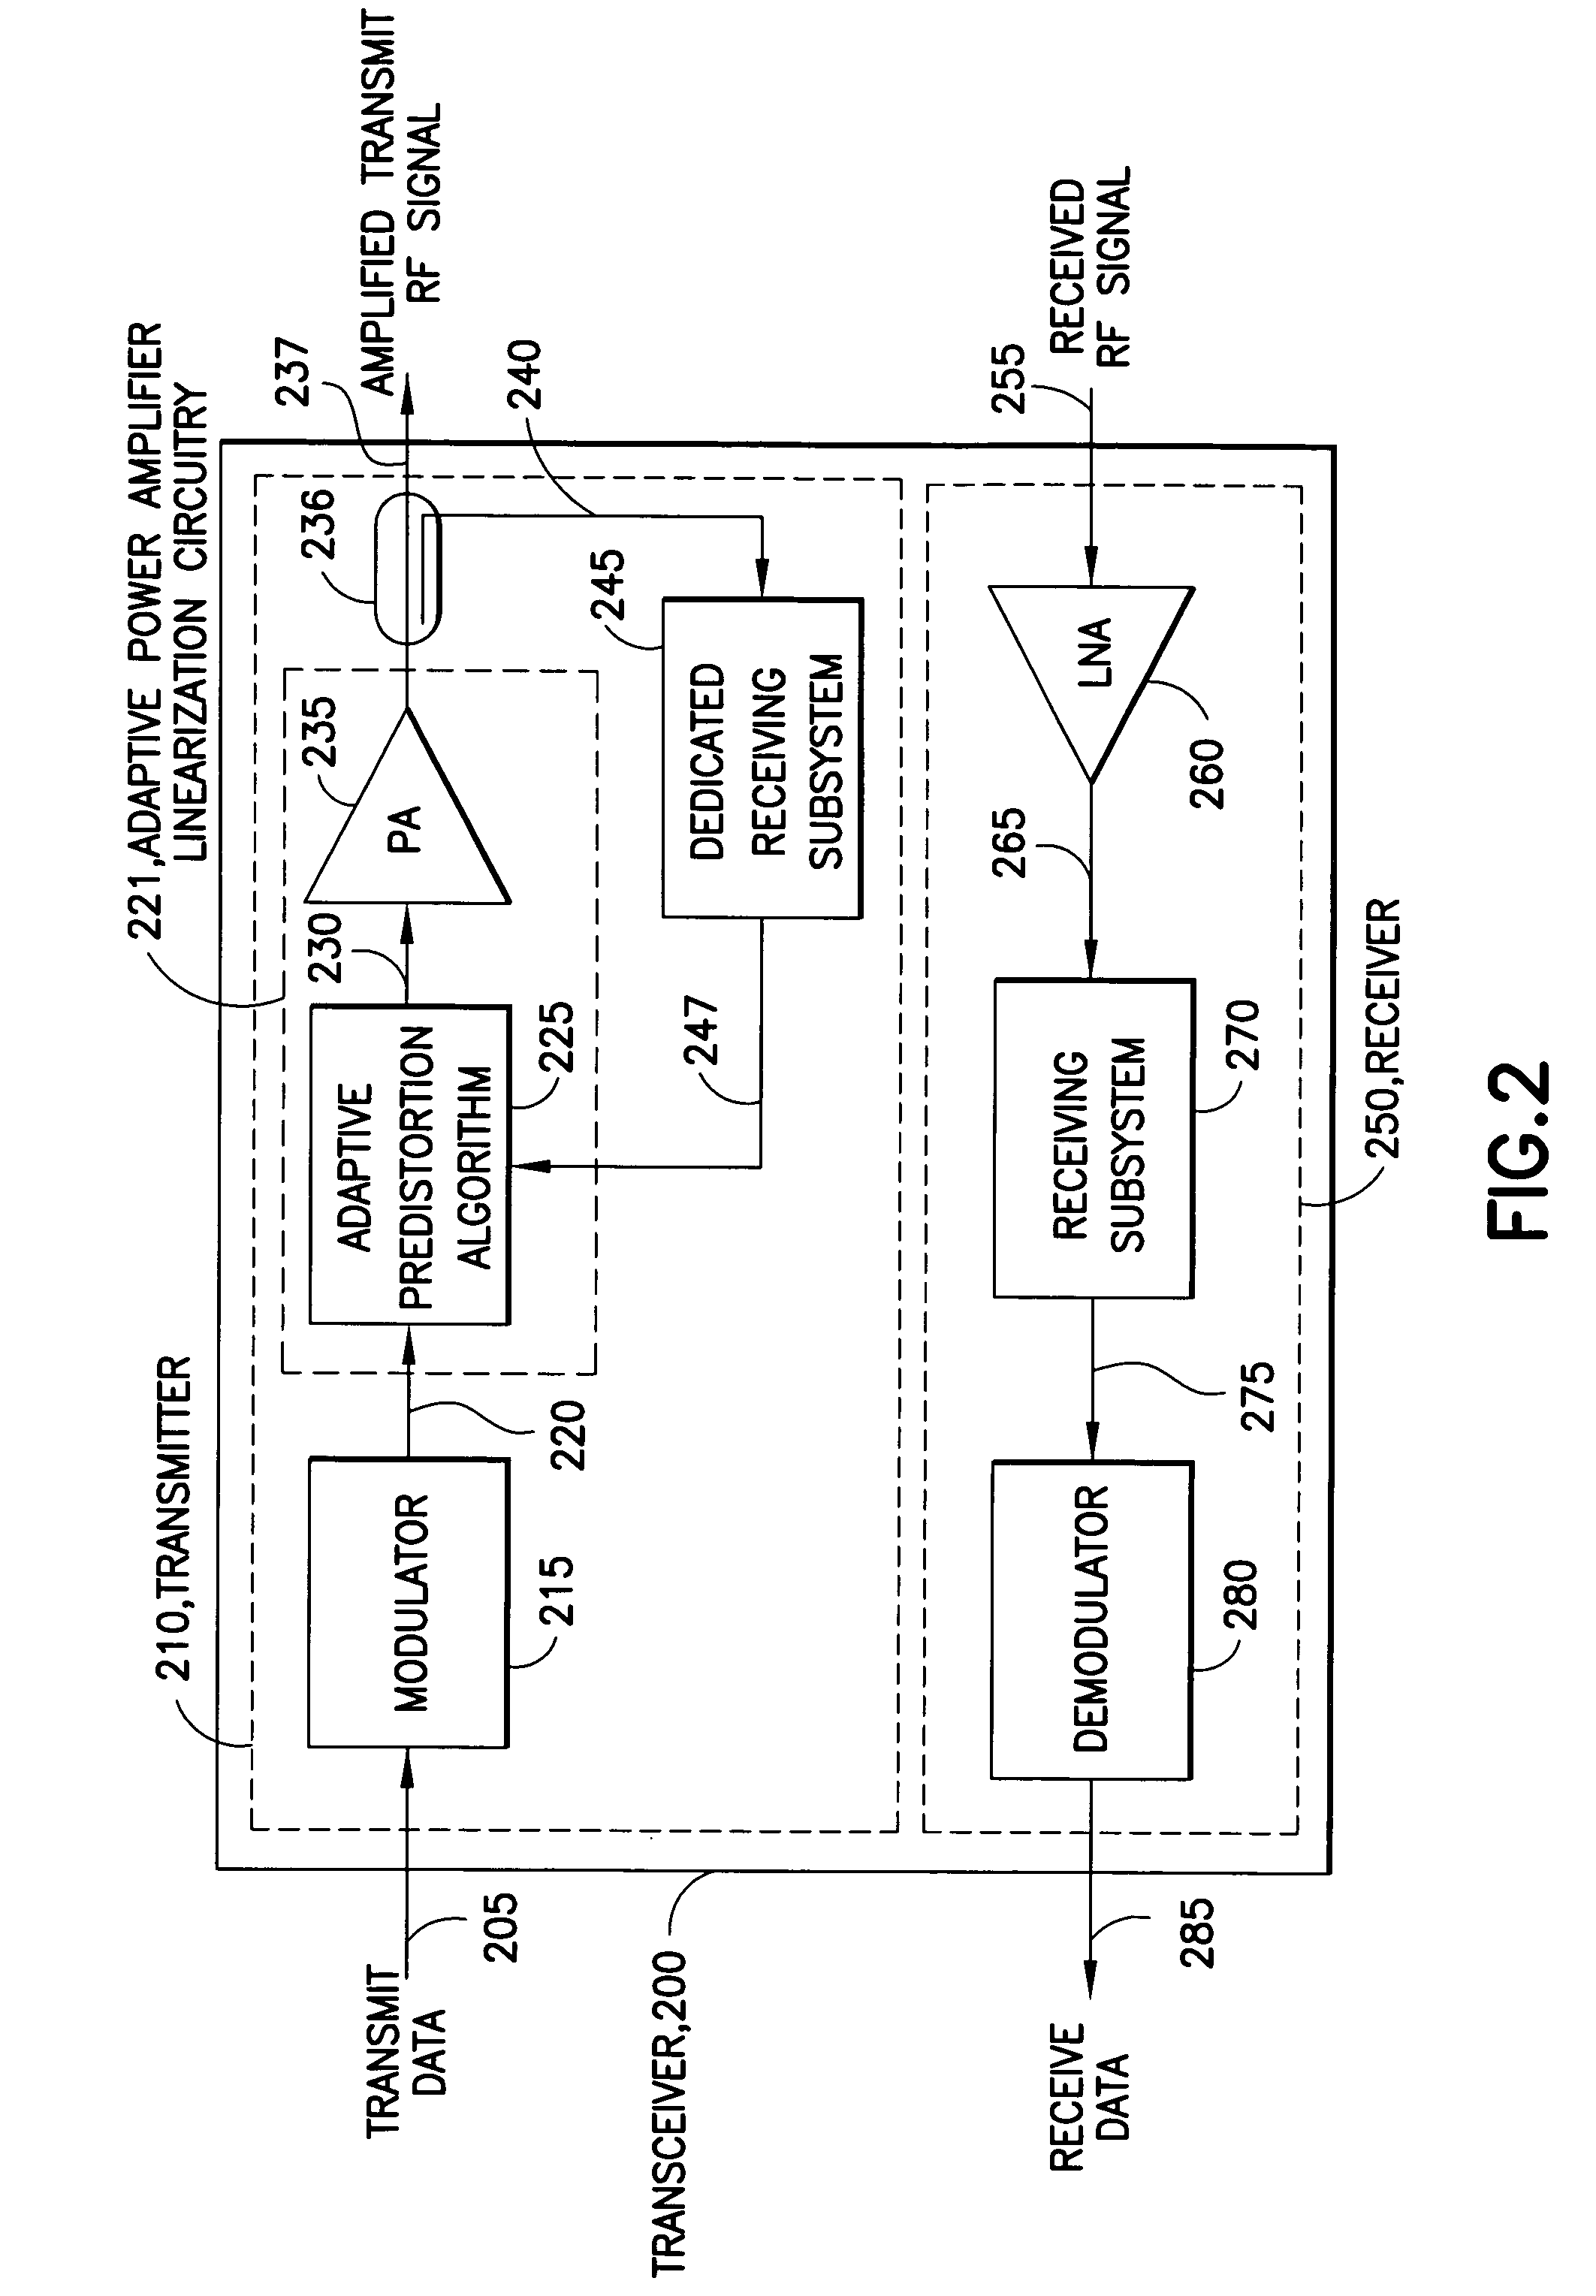 Adaptive power amplifier linearization in time division duplex communication systems